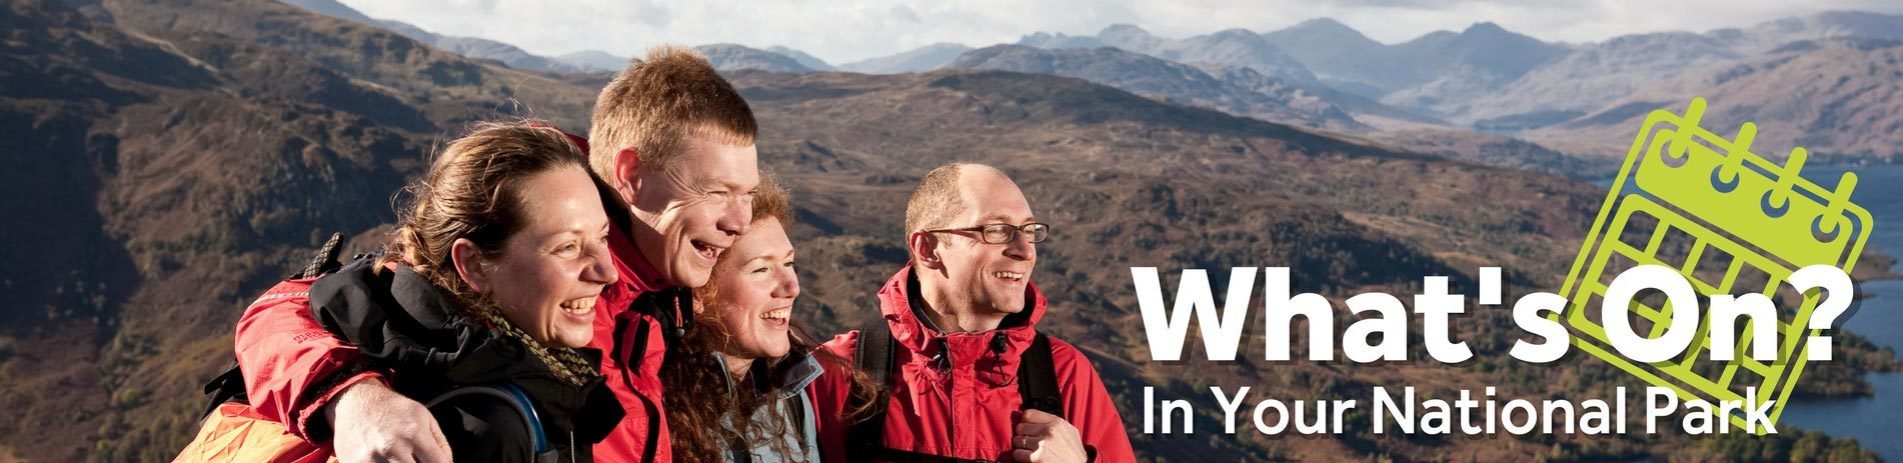 four-friends-two-male-two-female-holding-each-other-around-the-shoulder-and-laughing-on-summit-of-ben-aan-trossachs-mountains-and-loch-katrine-behind-them-text-in-corner-whats-on-in-your-national-park-with-green-calander-graphic